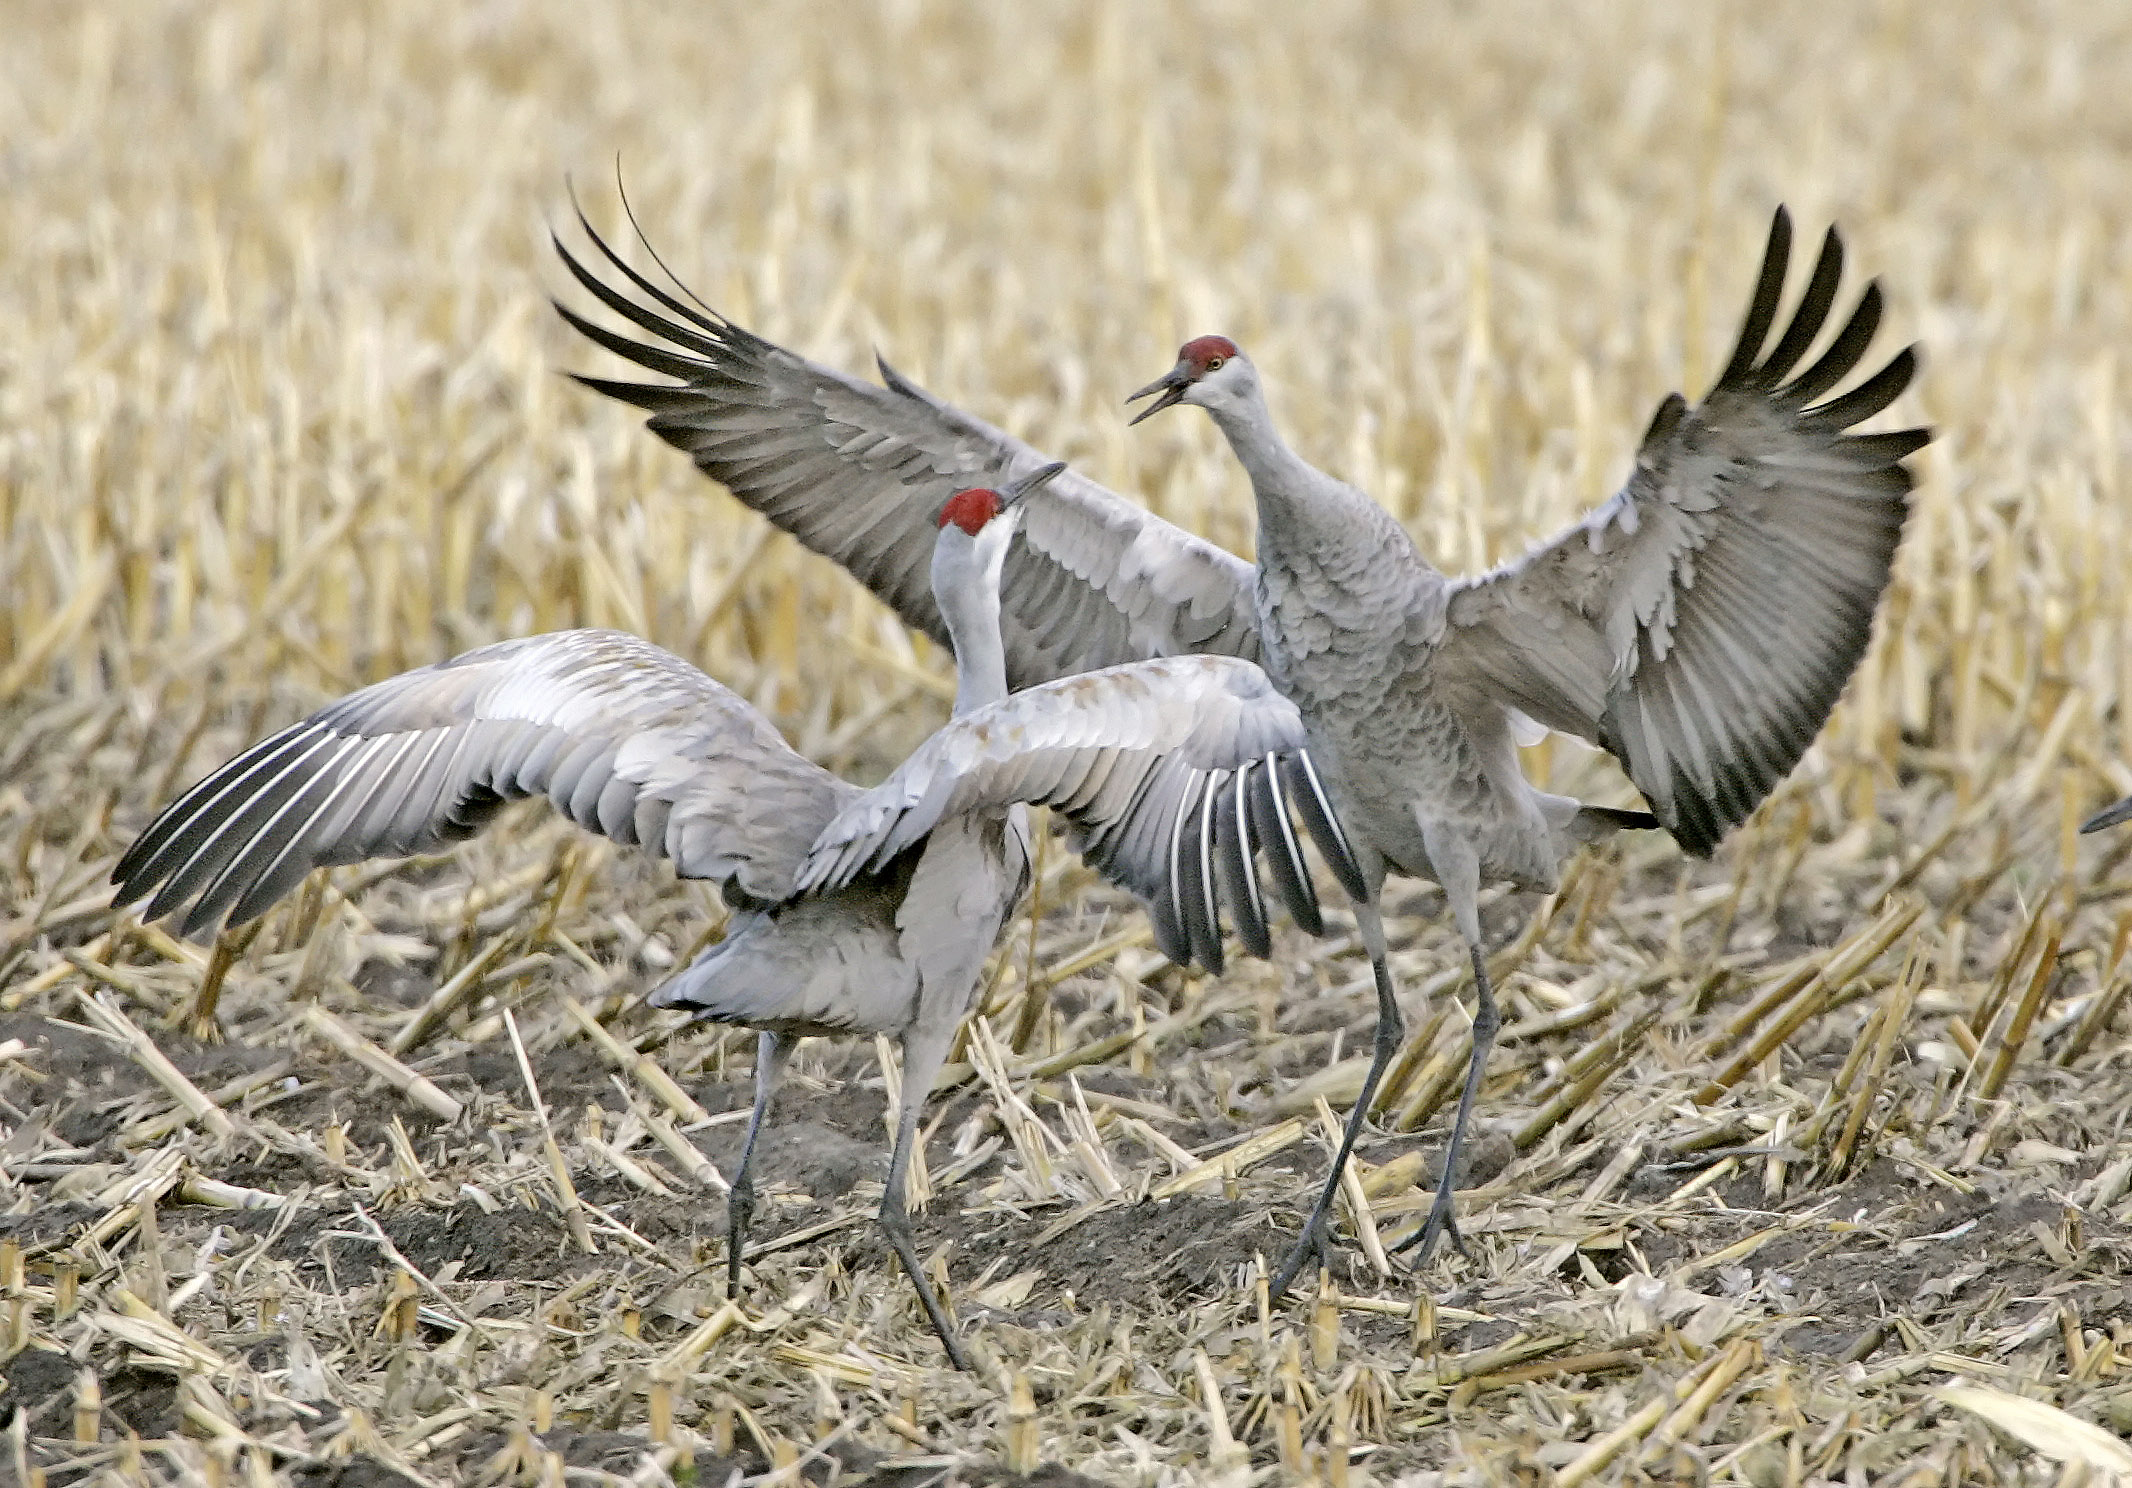 A 'conservation success story': first Great Midwest Crane Fest to